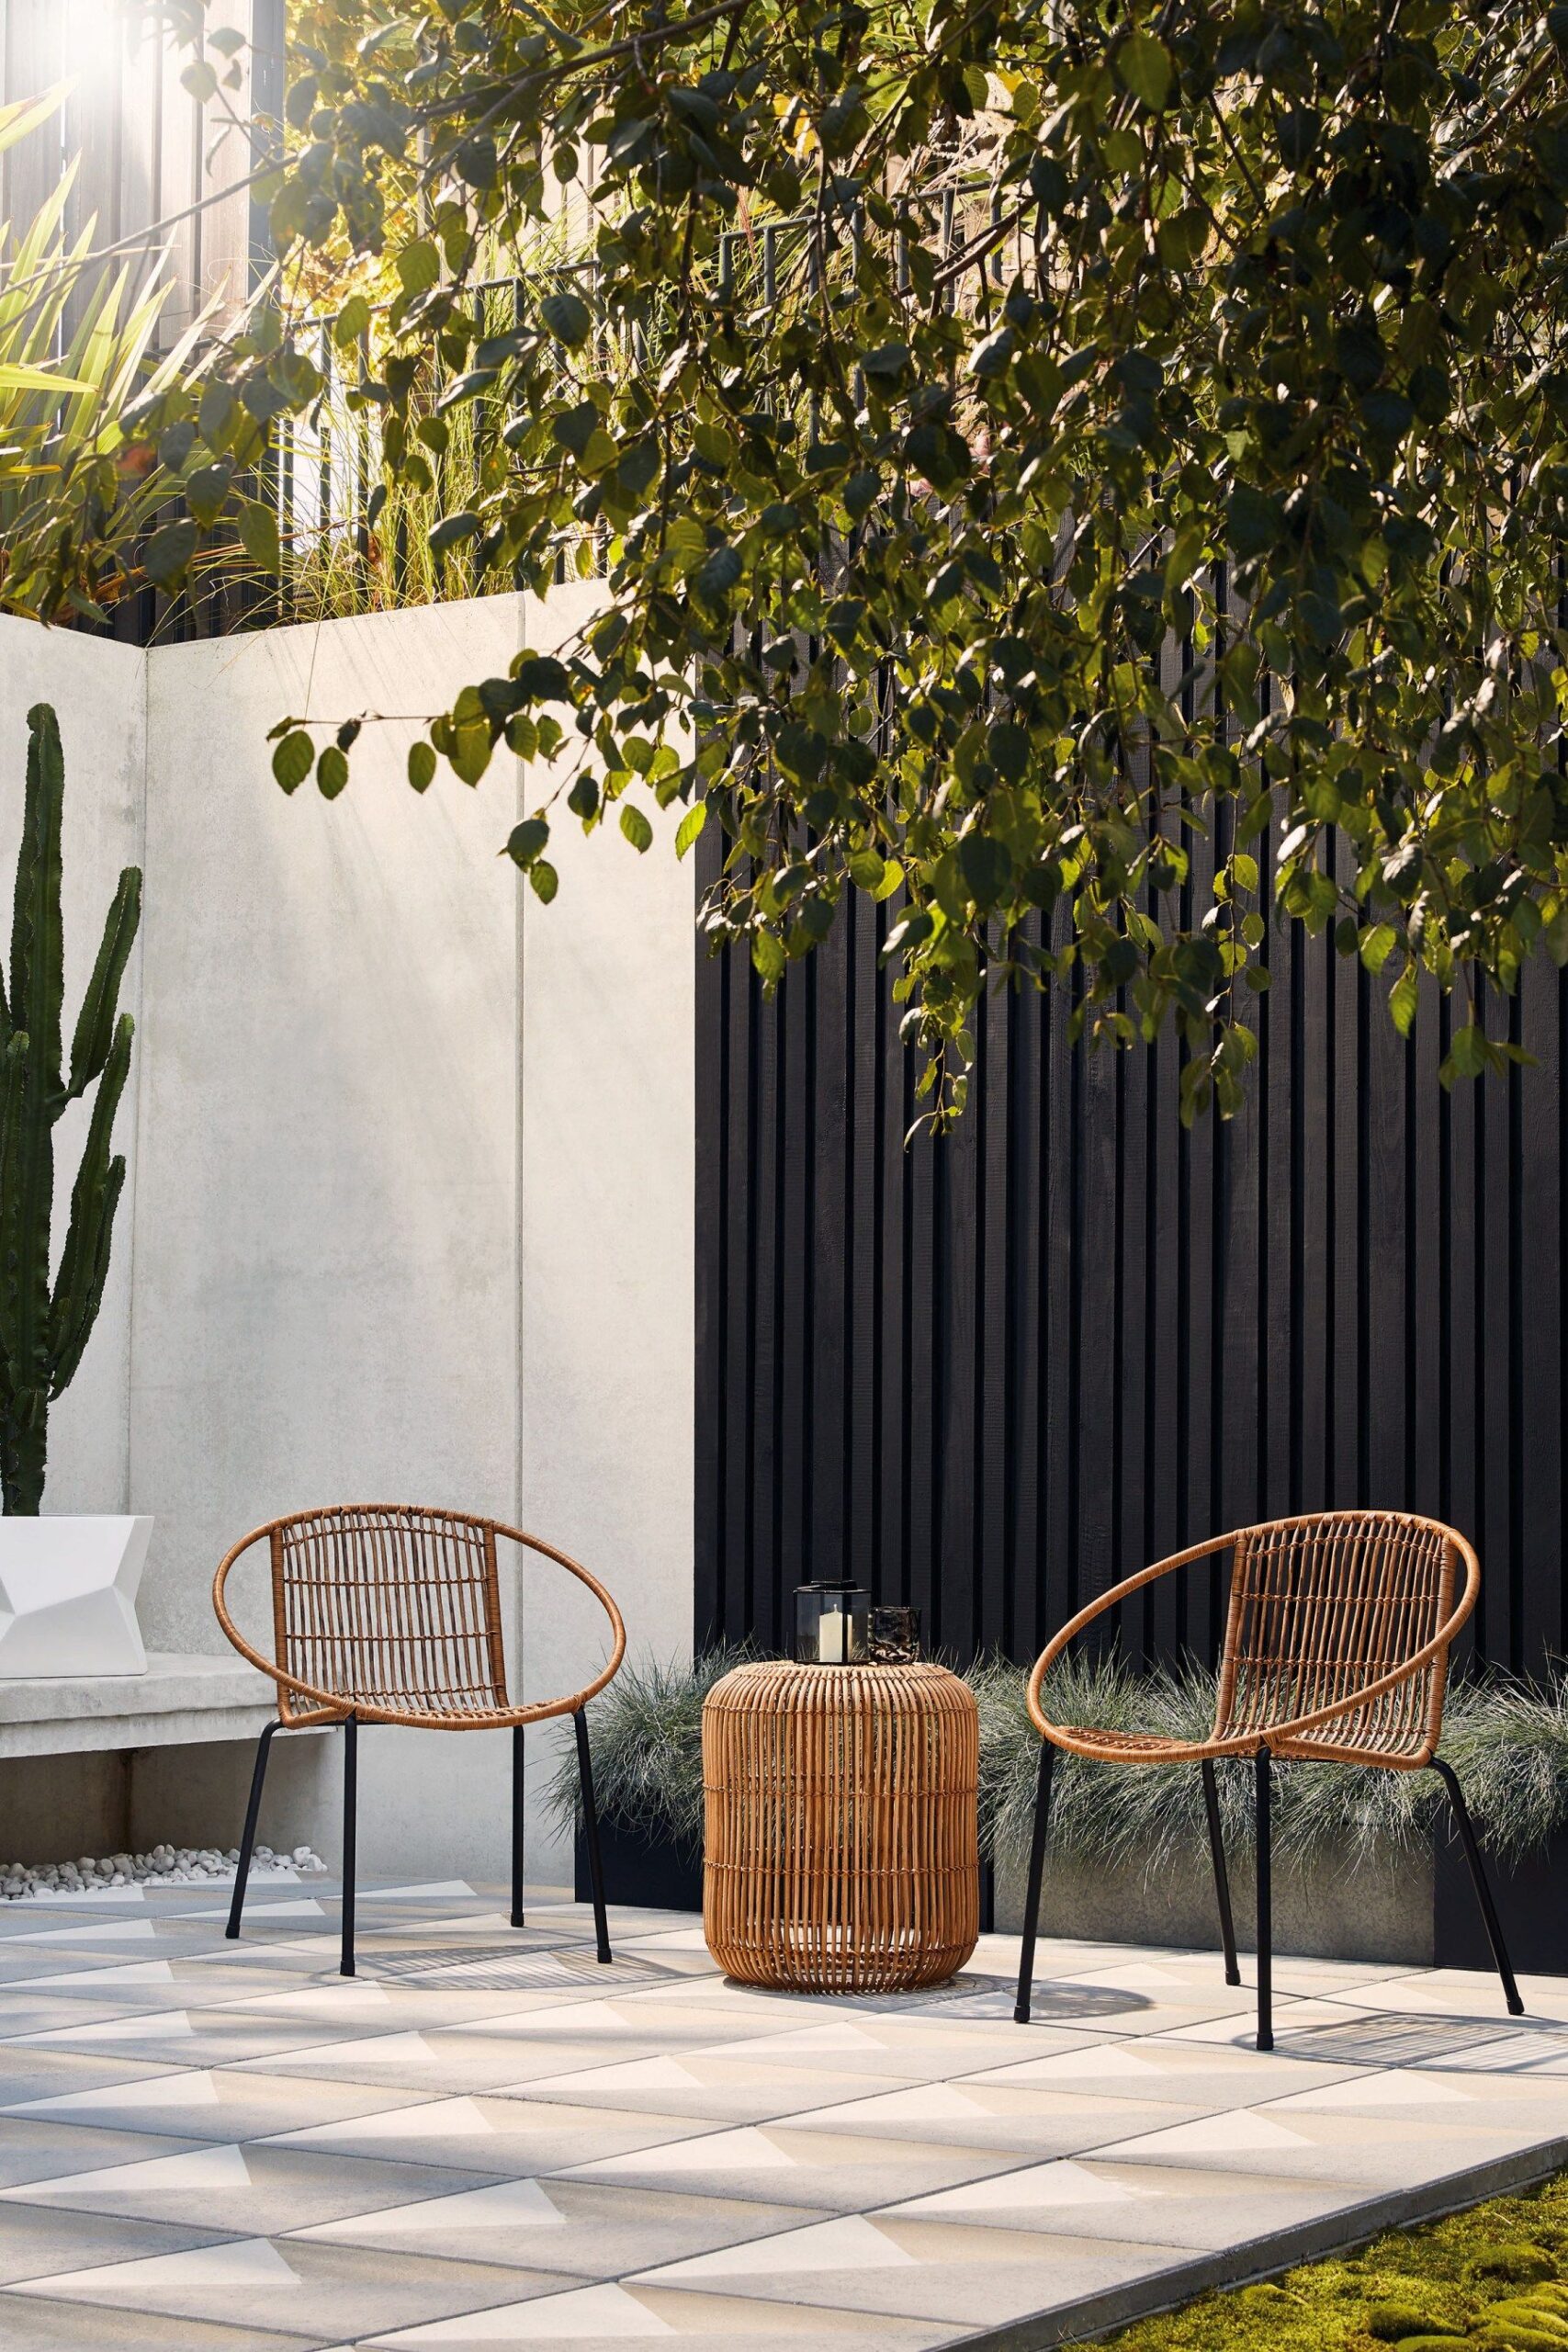 Utilise the outdoor space by fixing
contemporary outdoor furniture